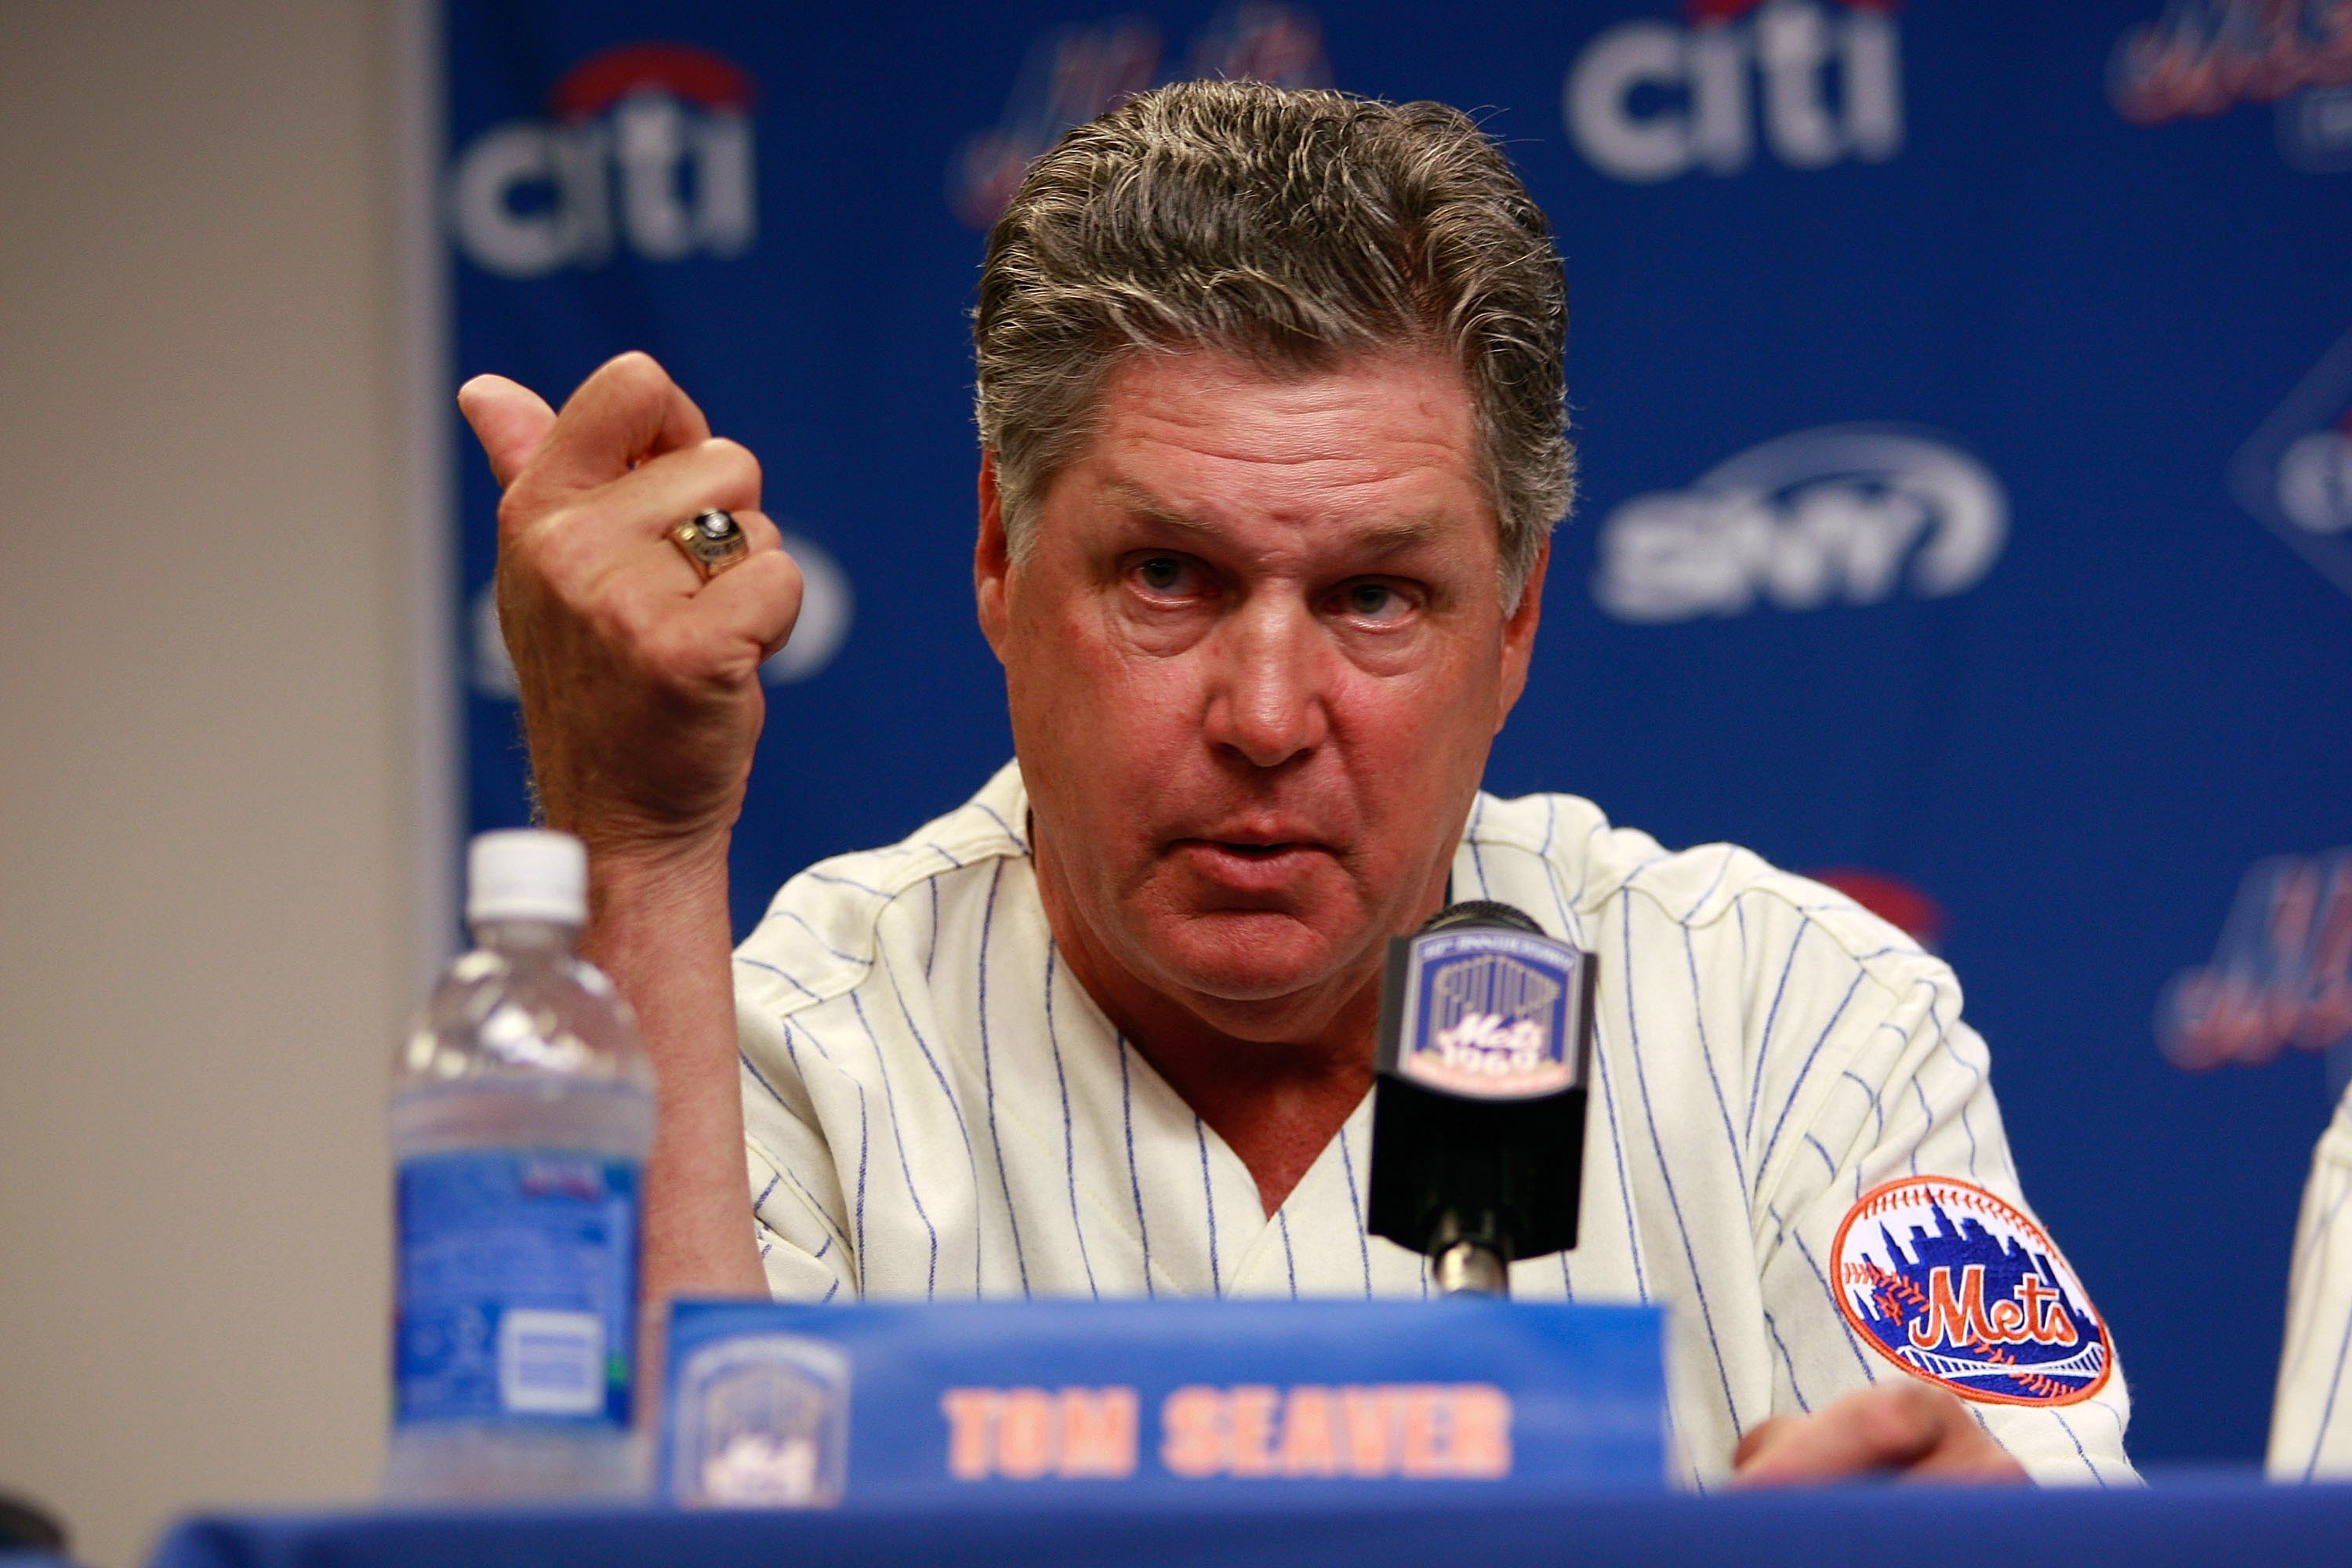 NEW YORK - AUGUST 22:  Tom Seaver speaks at a press conference commemorating the New York Mets 40th anniversary of the 1969 World Championship team on August 22, 2009 at Citi Field in the Flushing neighborhood of the Queens borough of New York City.  (Pho